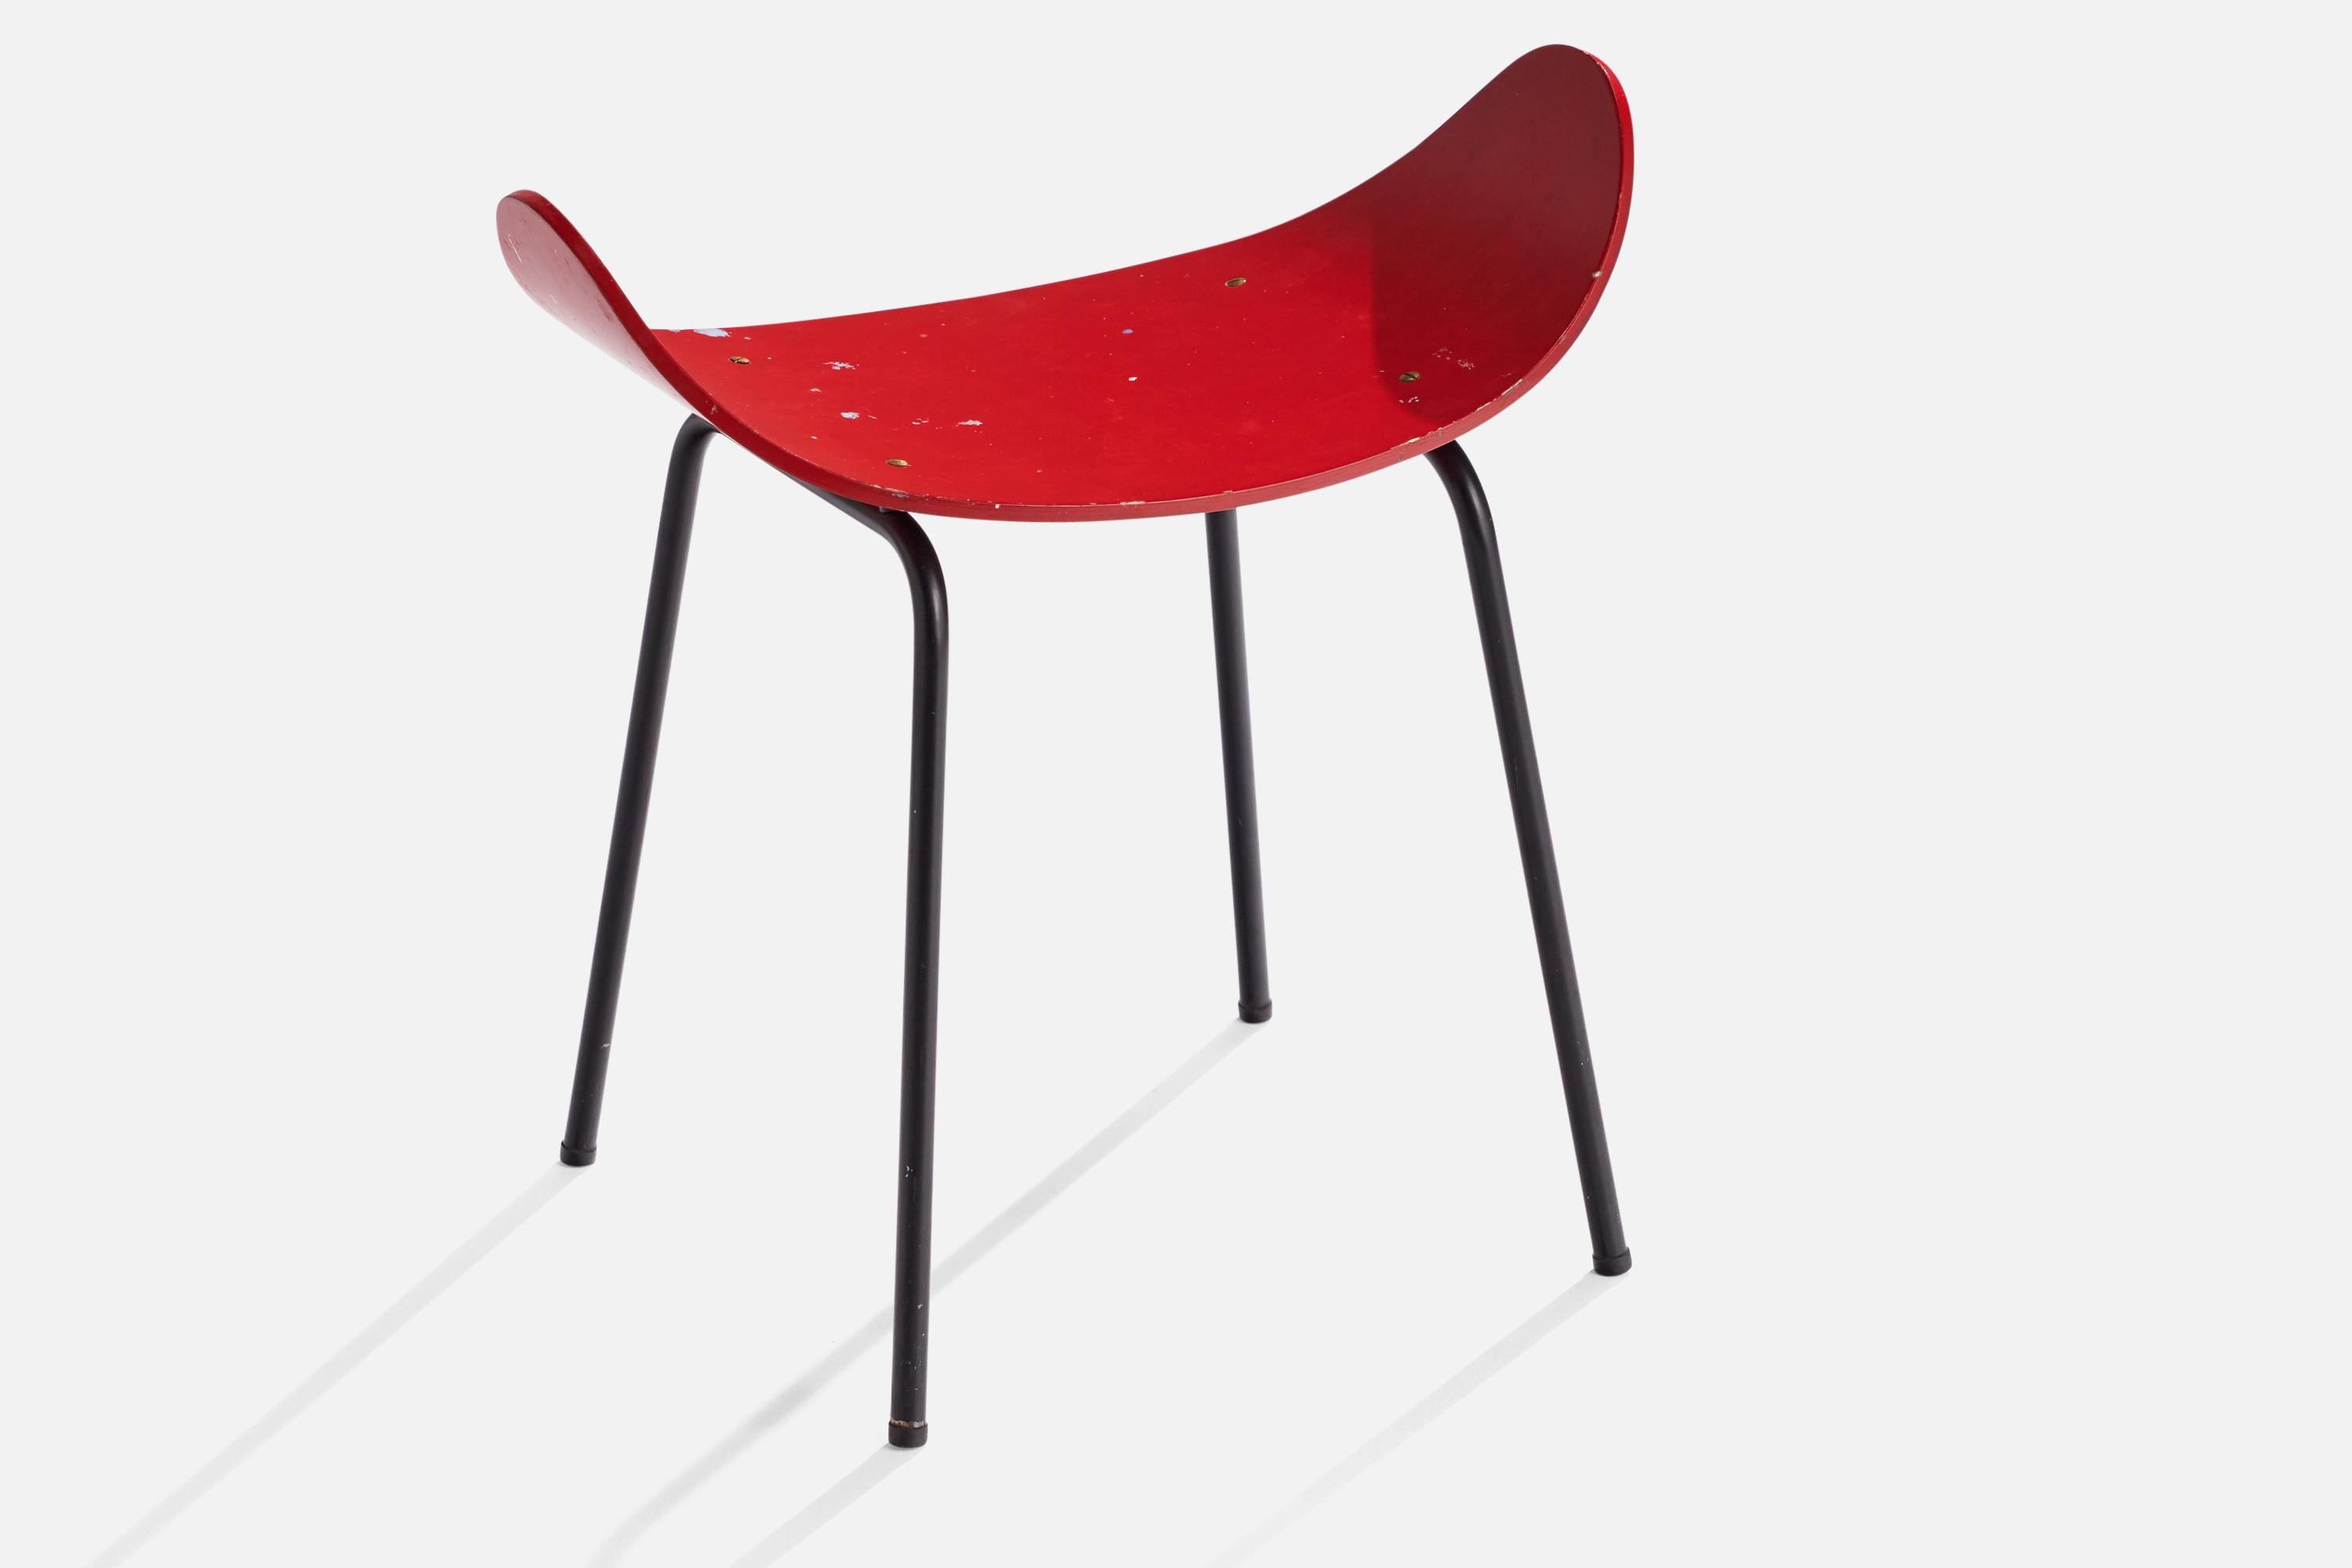 A moulded red-painted plywood and black-lacquered metal stool designed by Olof Kettunen and produced by J. Merivaara Oy, Finland, 1950s

Seat height 16”.